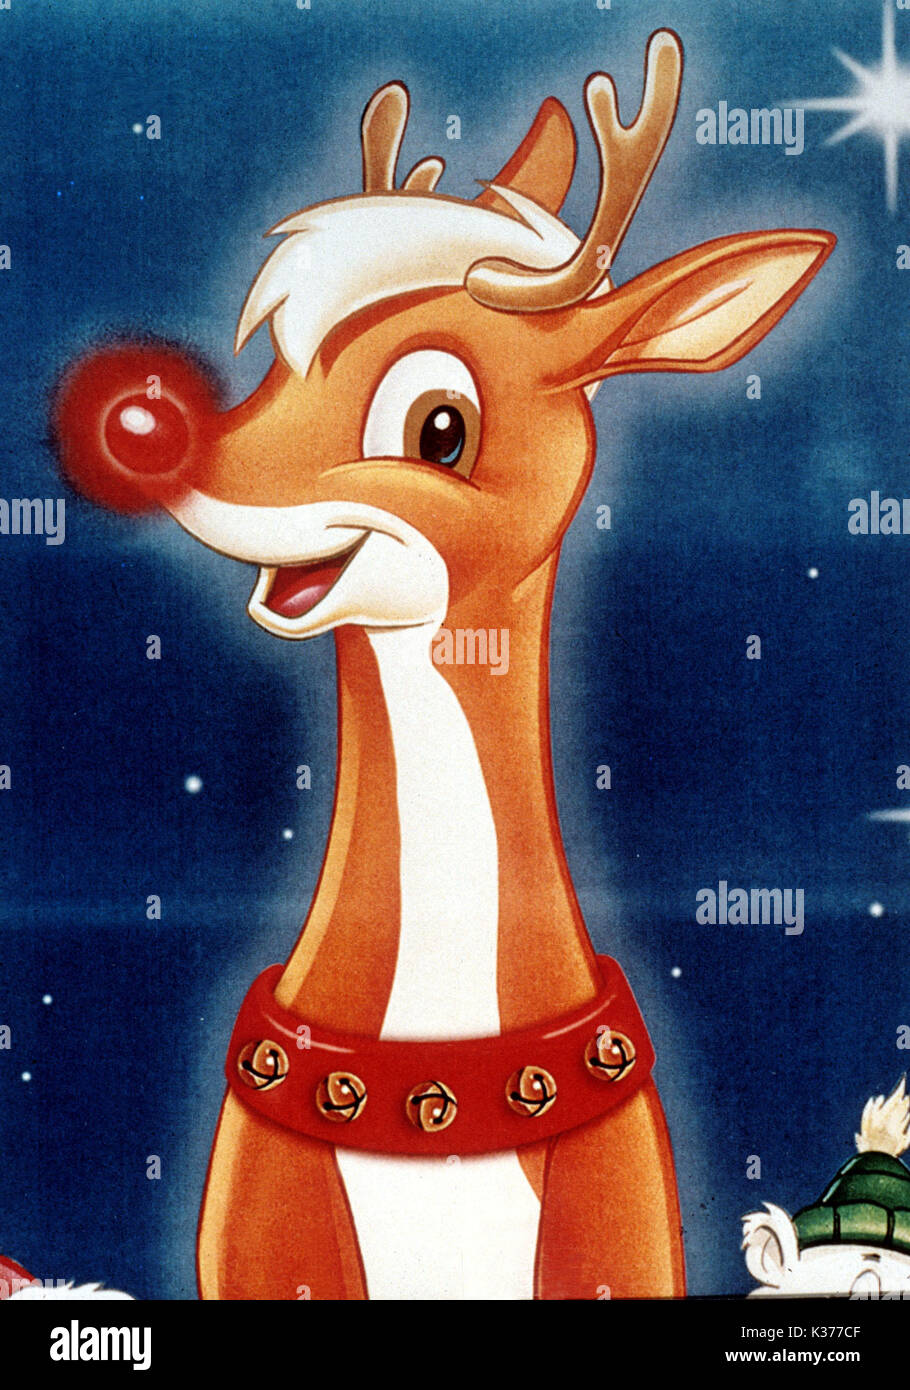 RUDOLPH THE RED REINDEER A GOODTIMES ENTERTAIMENT RUDOLPH THE RED NOSED REINDEER Date: 1998 Stock Photo - Alamy